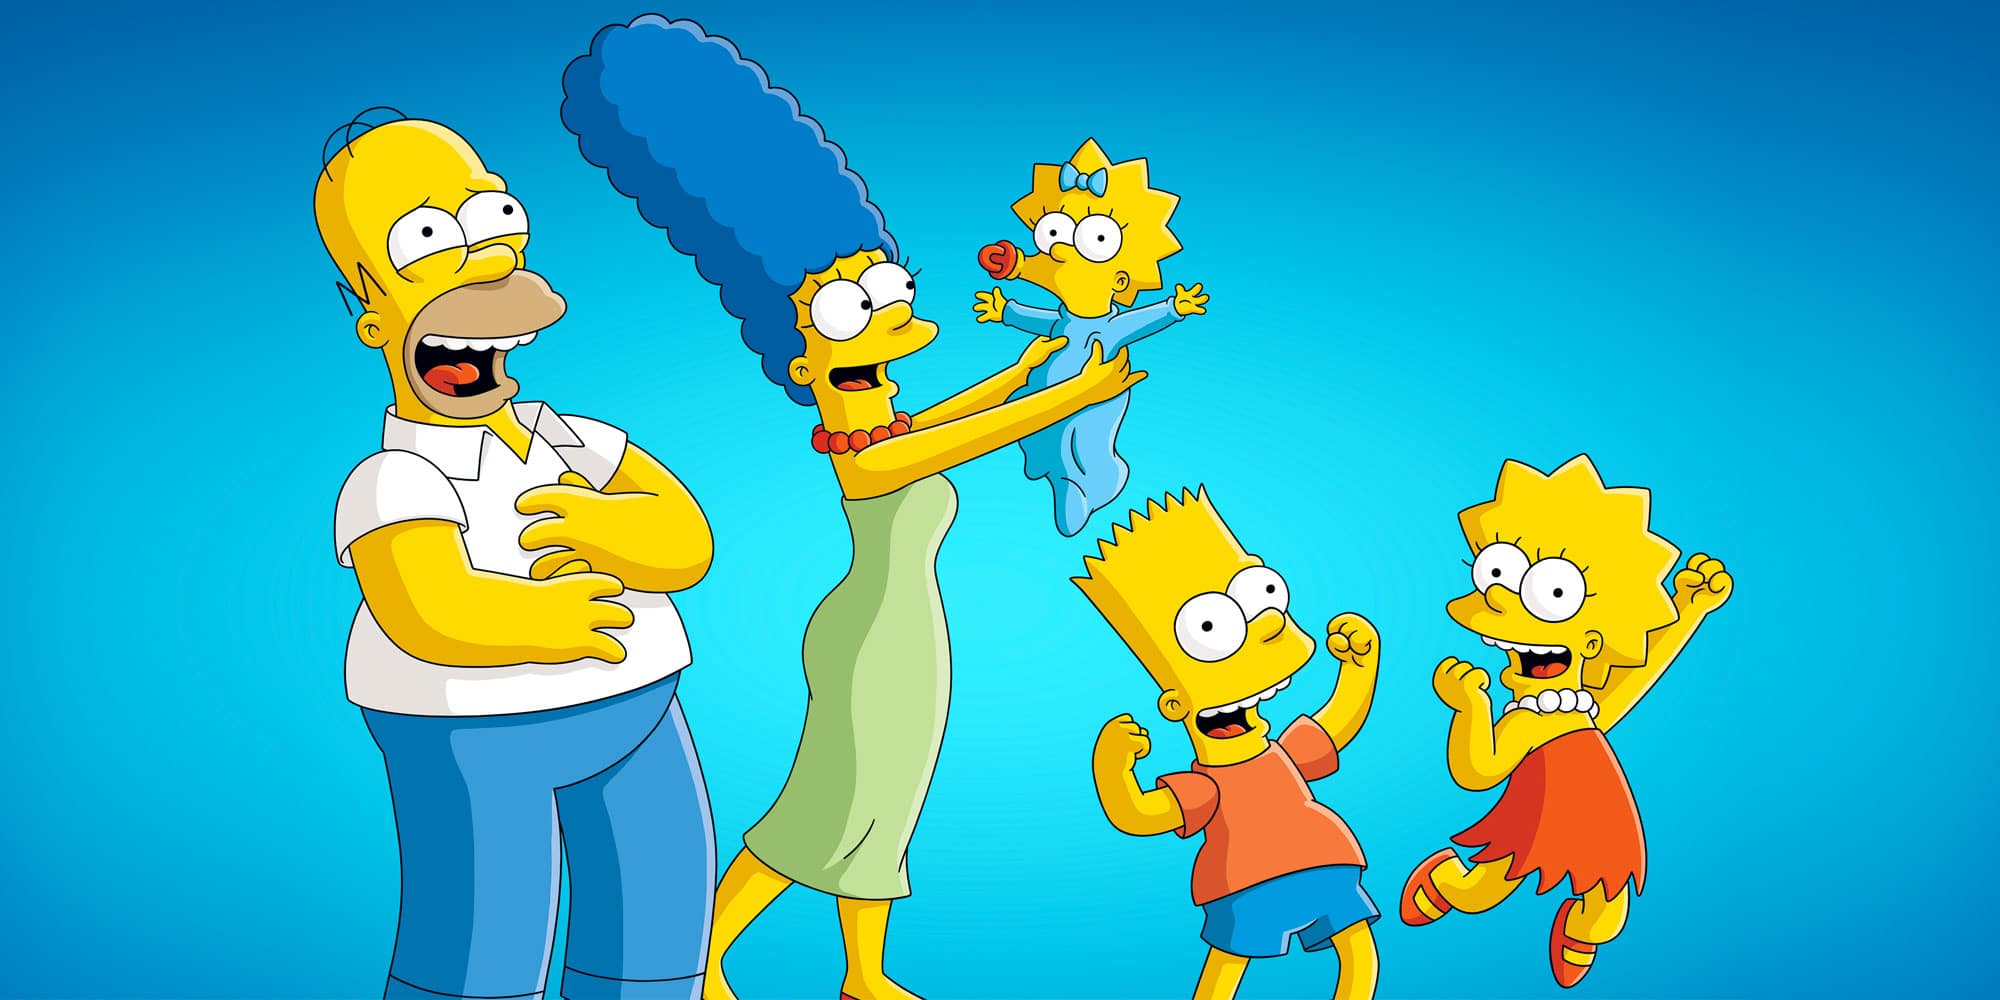 11 Best Simpsons Guest Stars of All-Time (In No Particular Order)